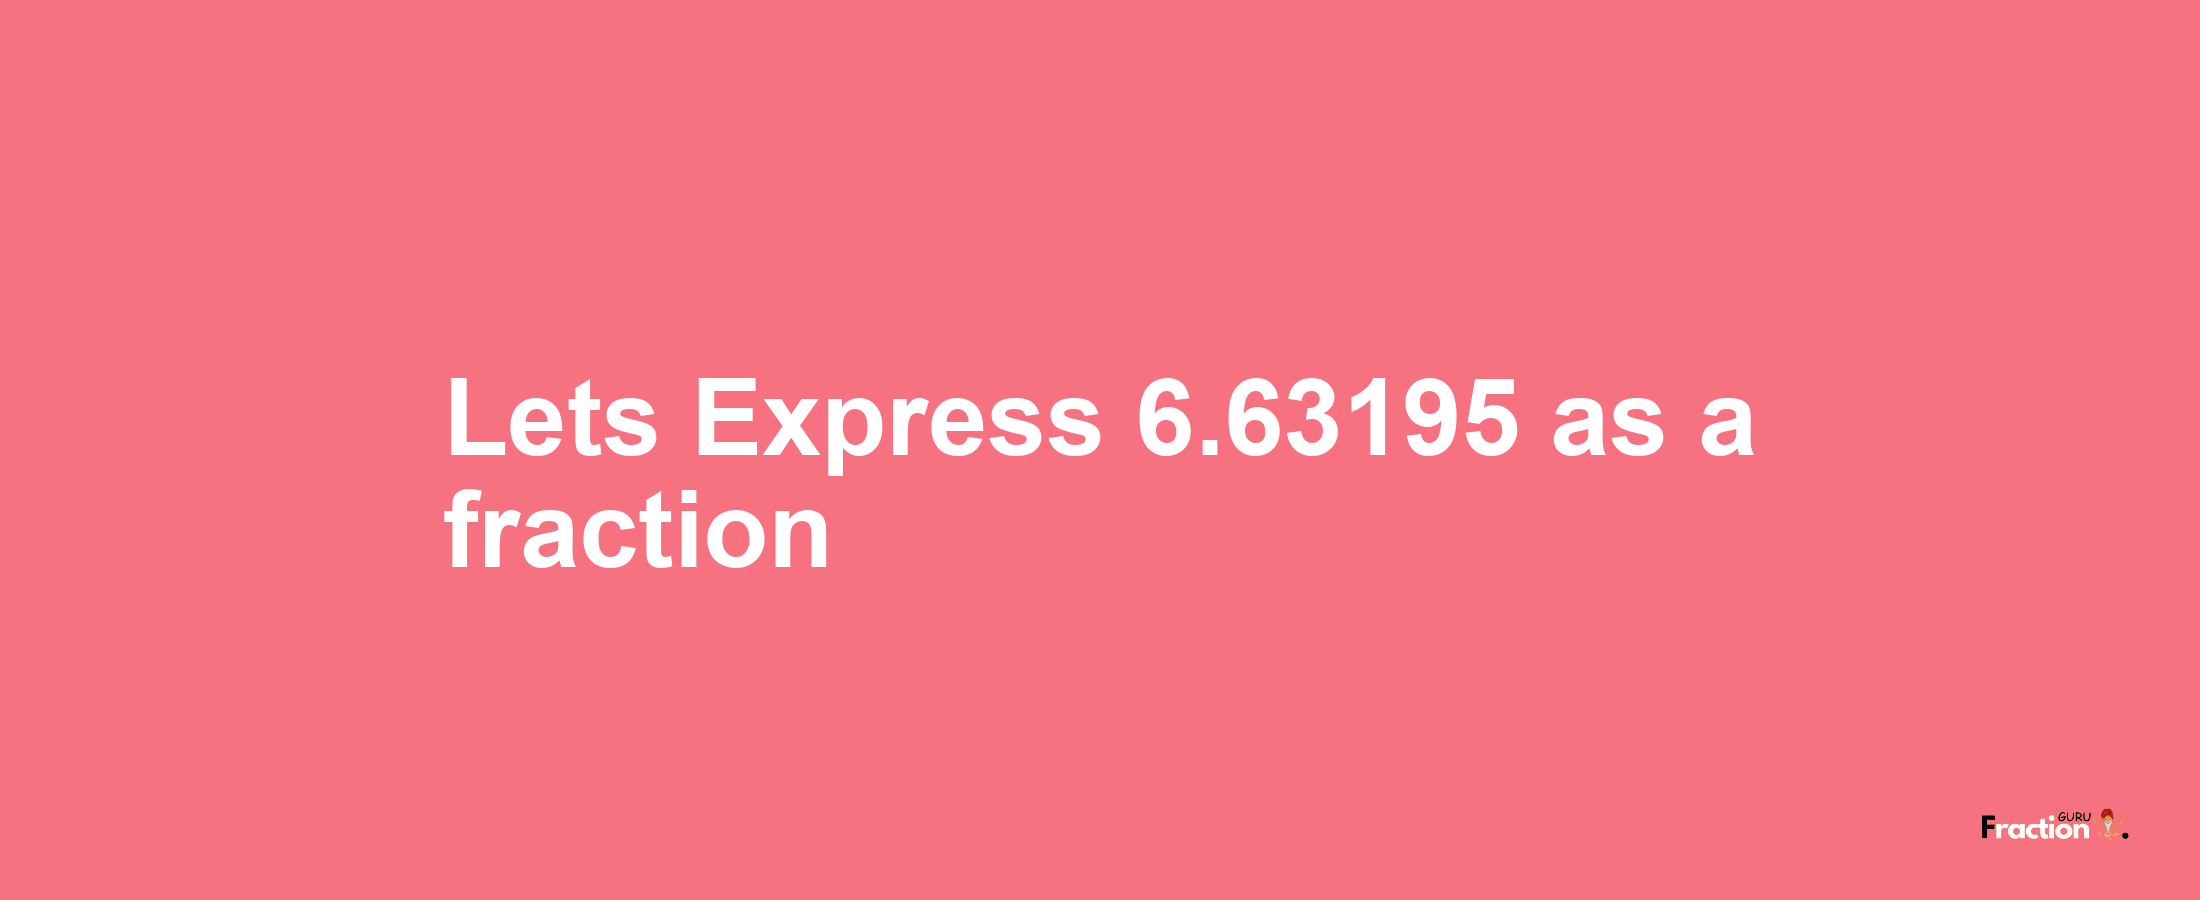 Lets Express 6.63195 as afraction